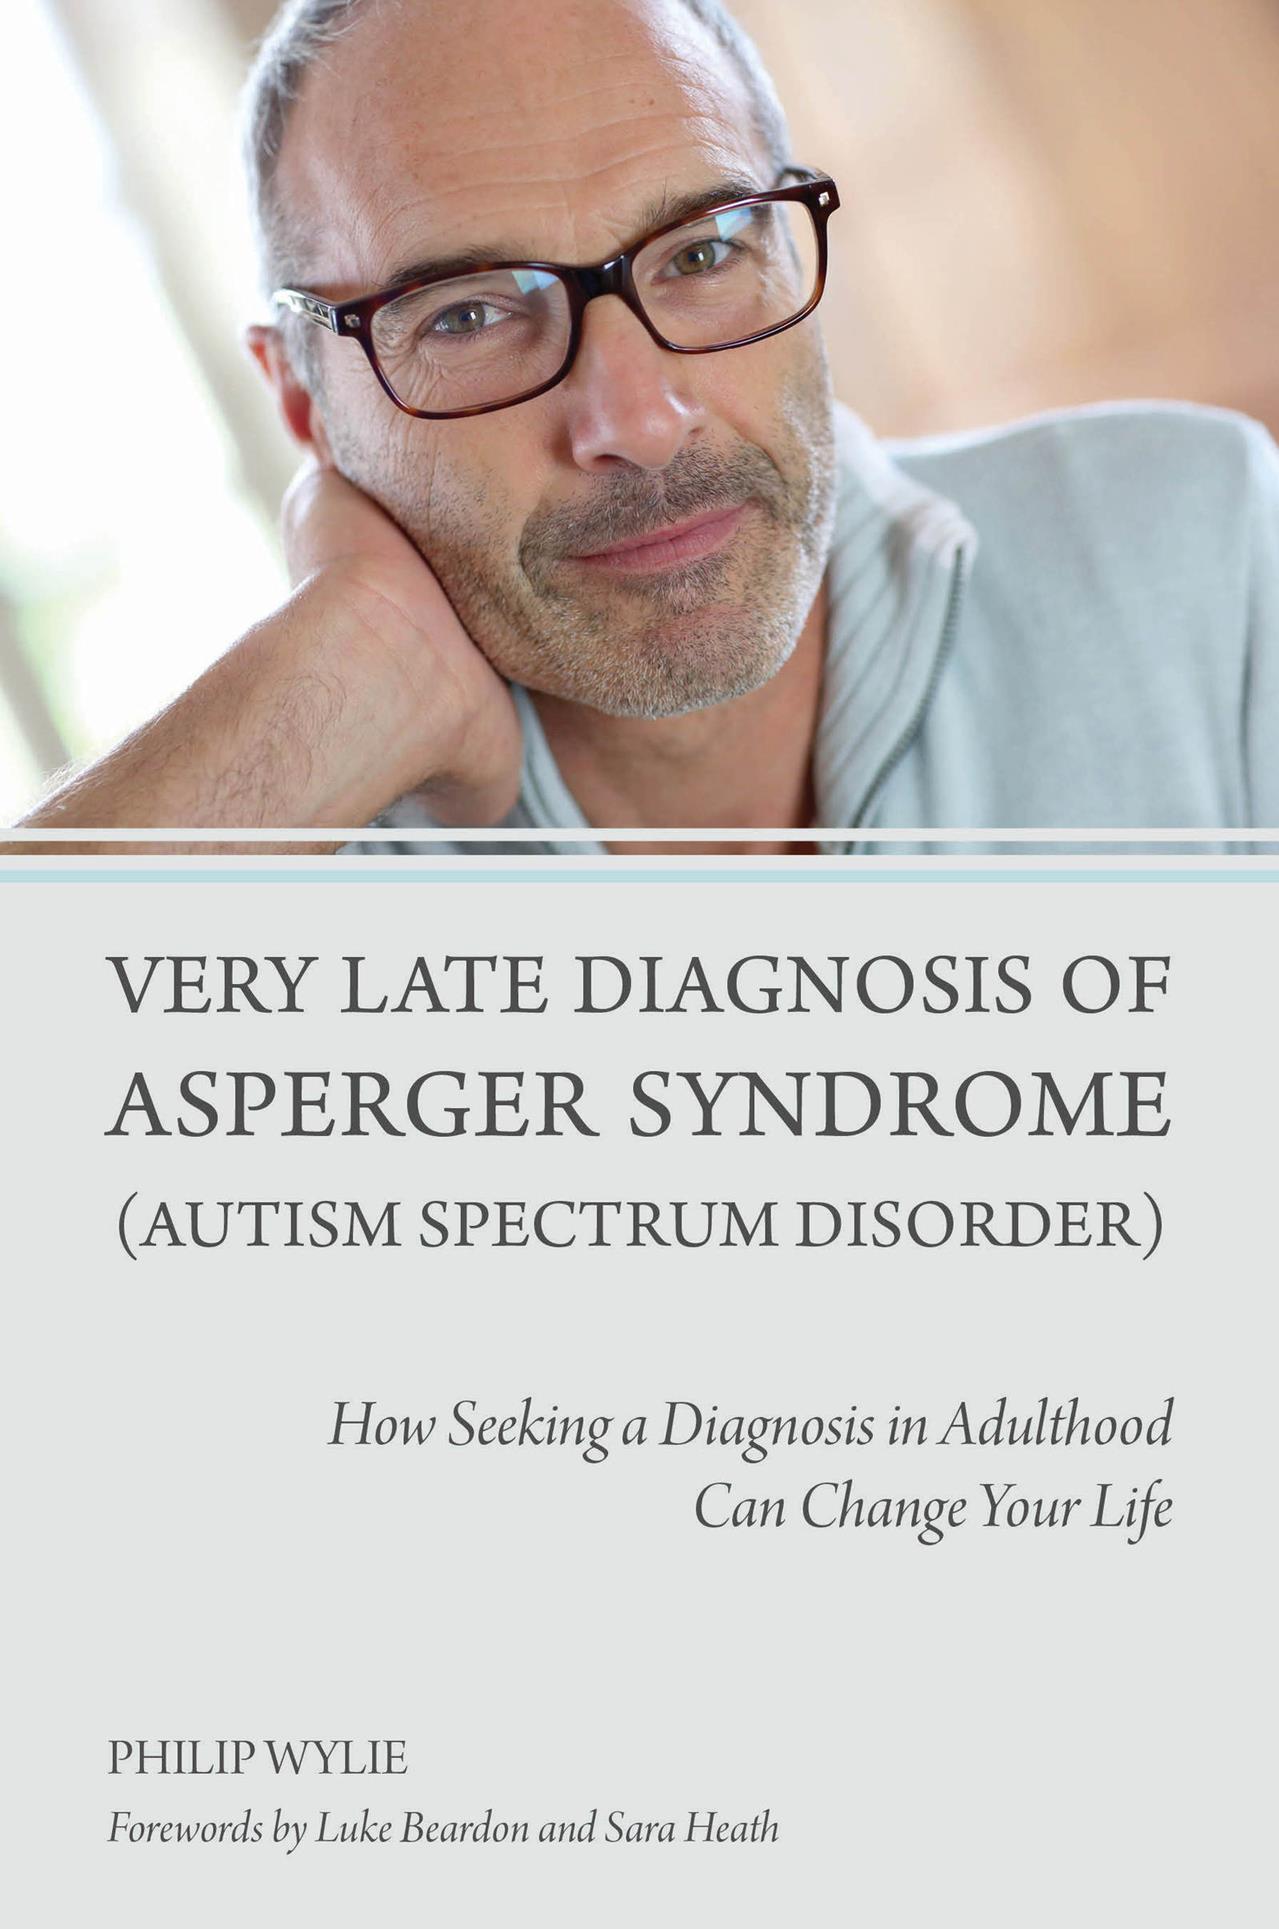 Very Late Diagnosis of Asperger Syndrome